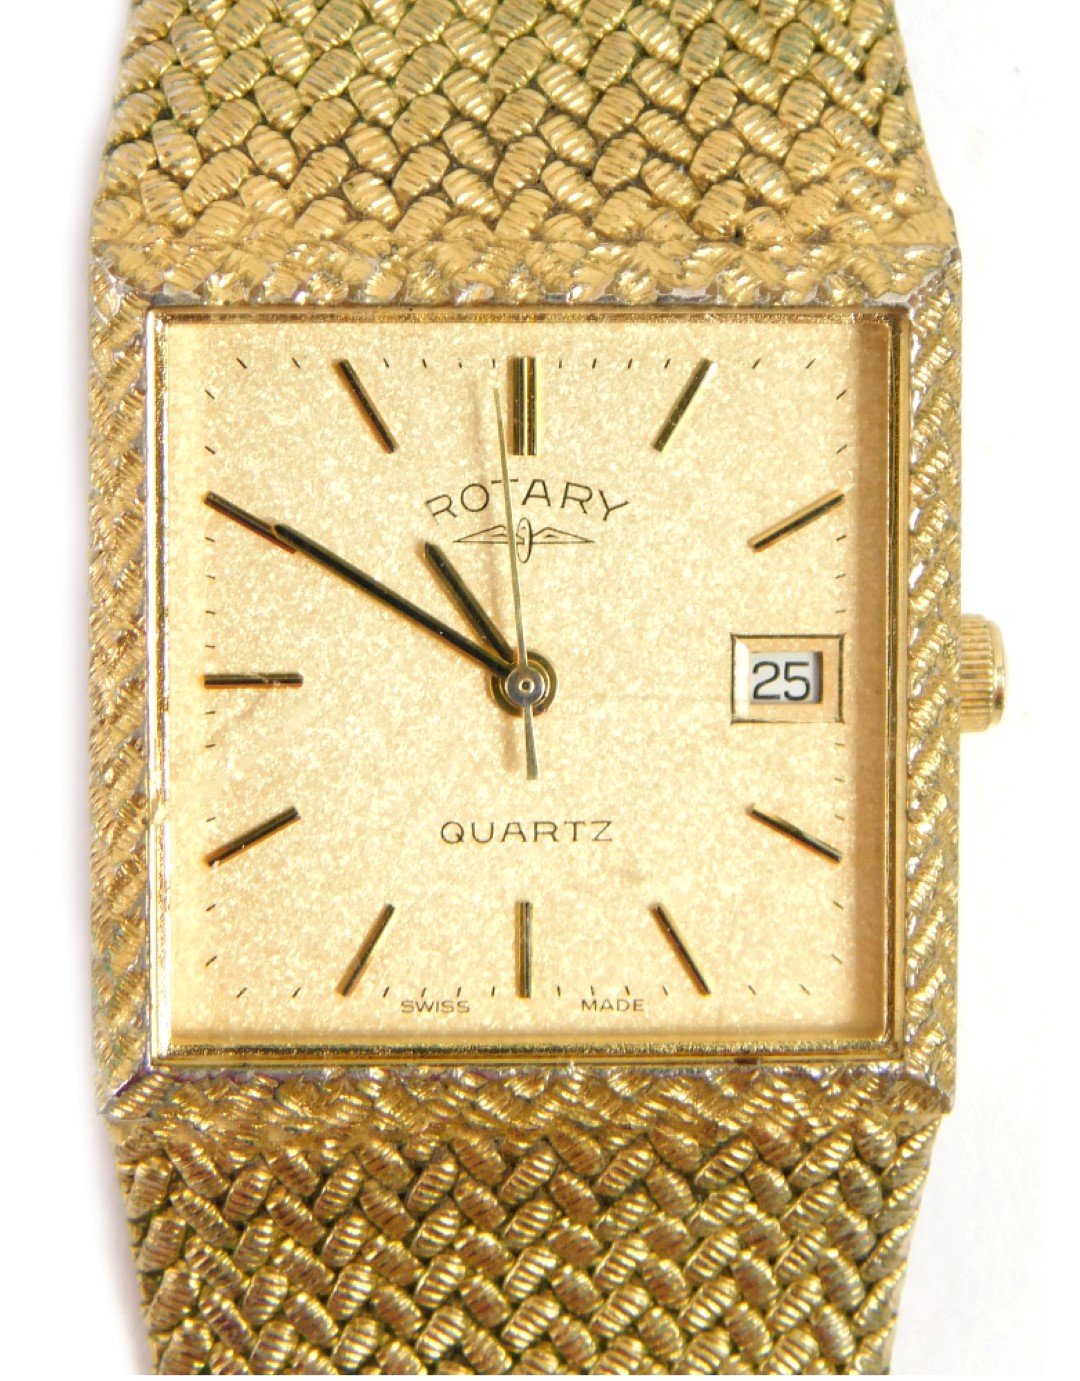 A Rotary gentleman's wristwatch, on gold plated strap with a square set watch head and quartz moveme